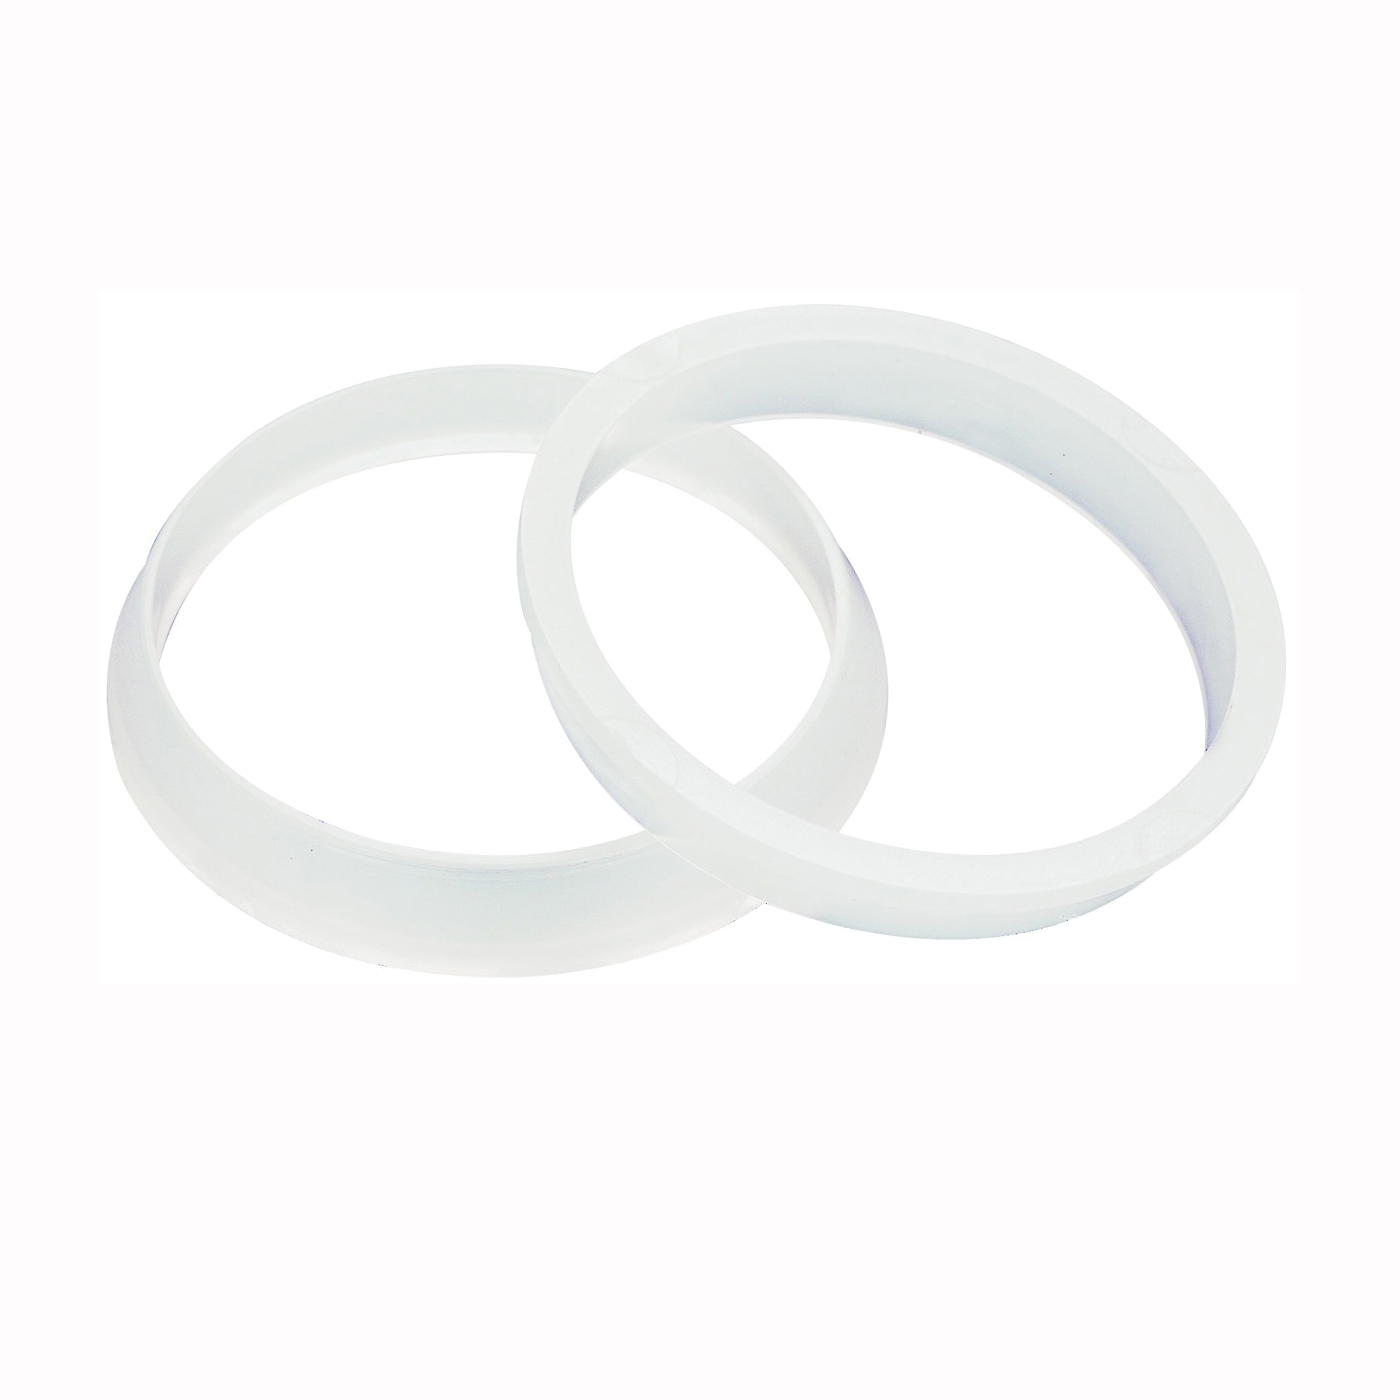 PP20965 Faucet Washer, 1-1/2 x 1-1/4 in, 1-1/2 x 1-1/2 in, Polyethylene, For: Plastic Drainage Systems